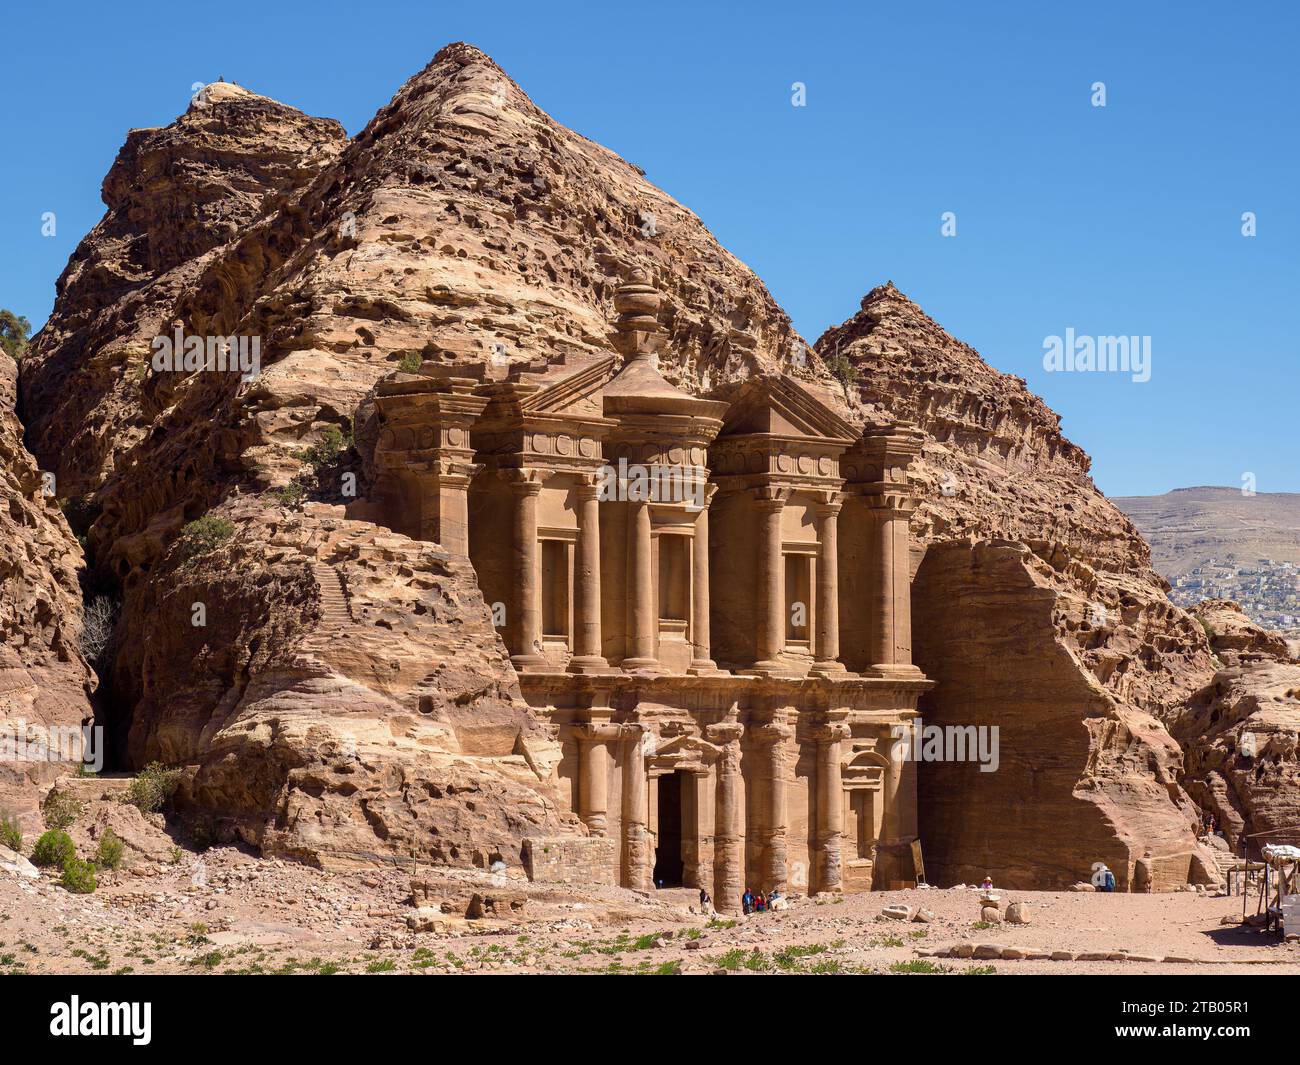 The Petra Monastery (Al Dayr), Petra Archaeological Park, a UNESCO World Heritage Site, 7 New Wonders of the World, Jordan. Stock Photo